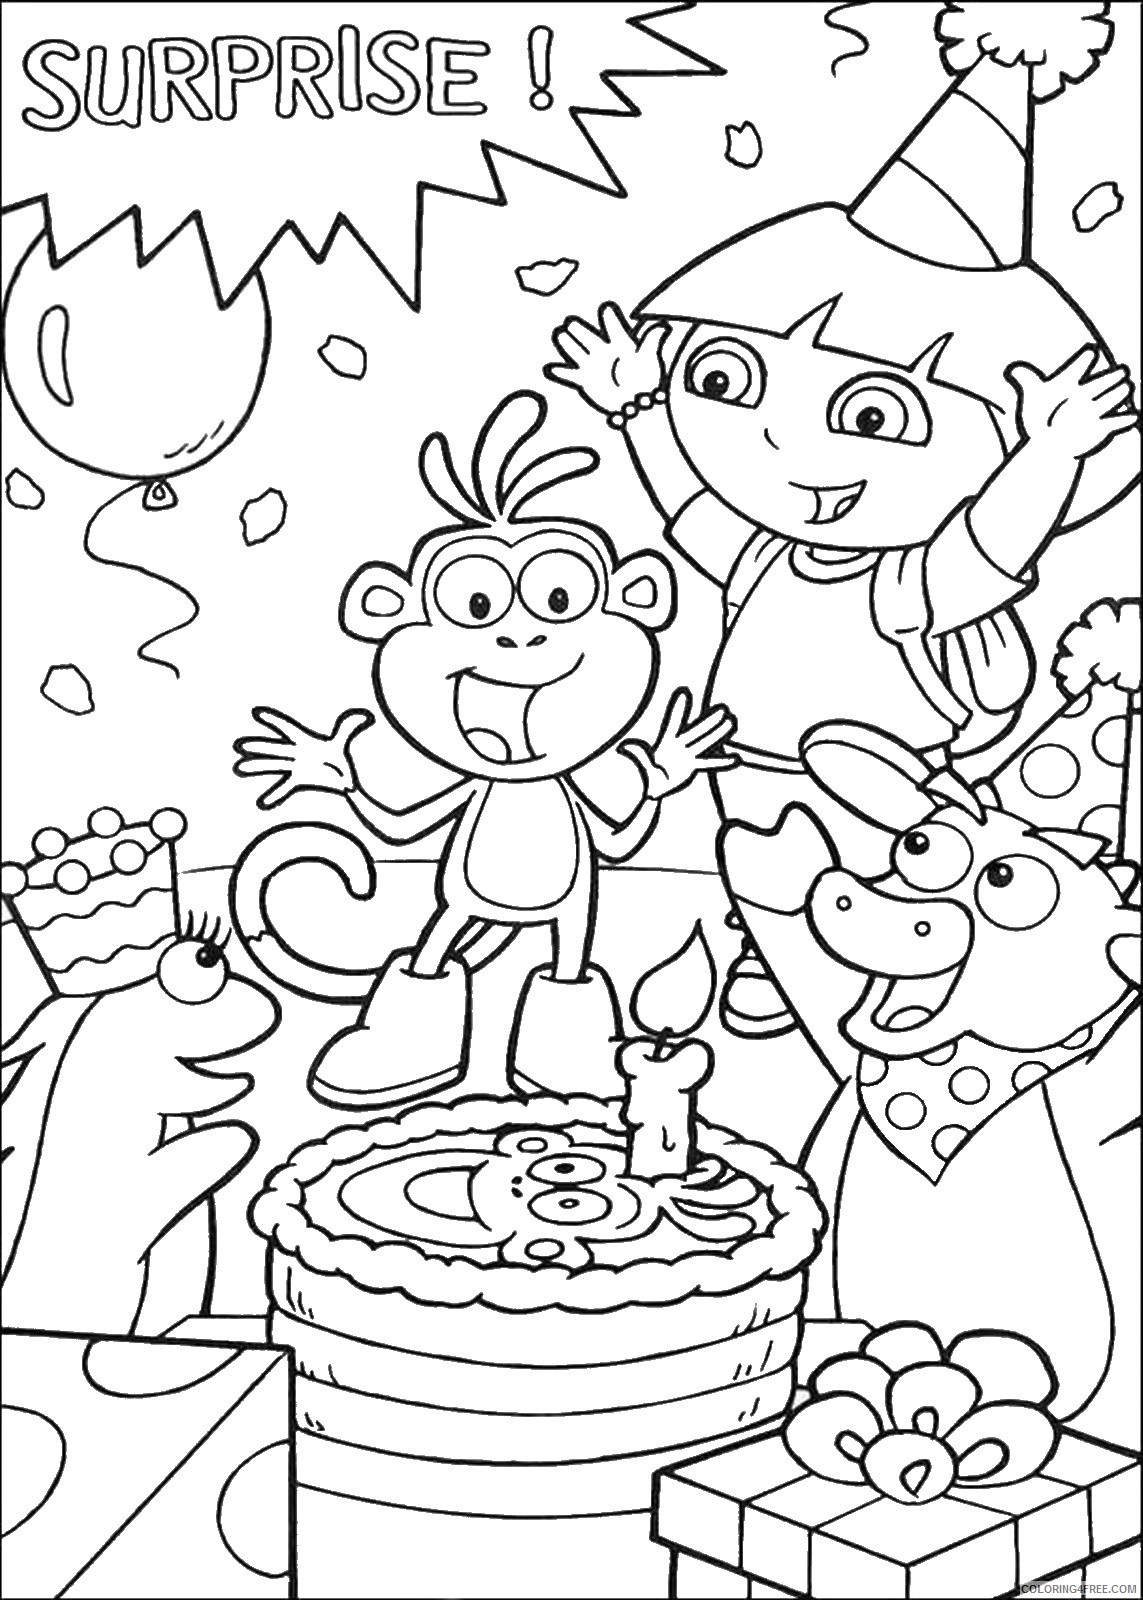 Dora the Explorer Coloring Pages Cartoons cl_dora_64 Printable 2020 2625 Coloring4free